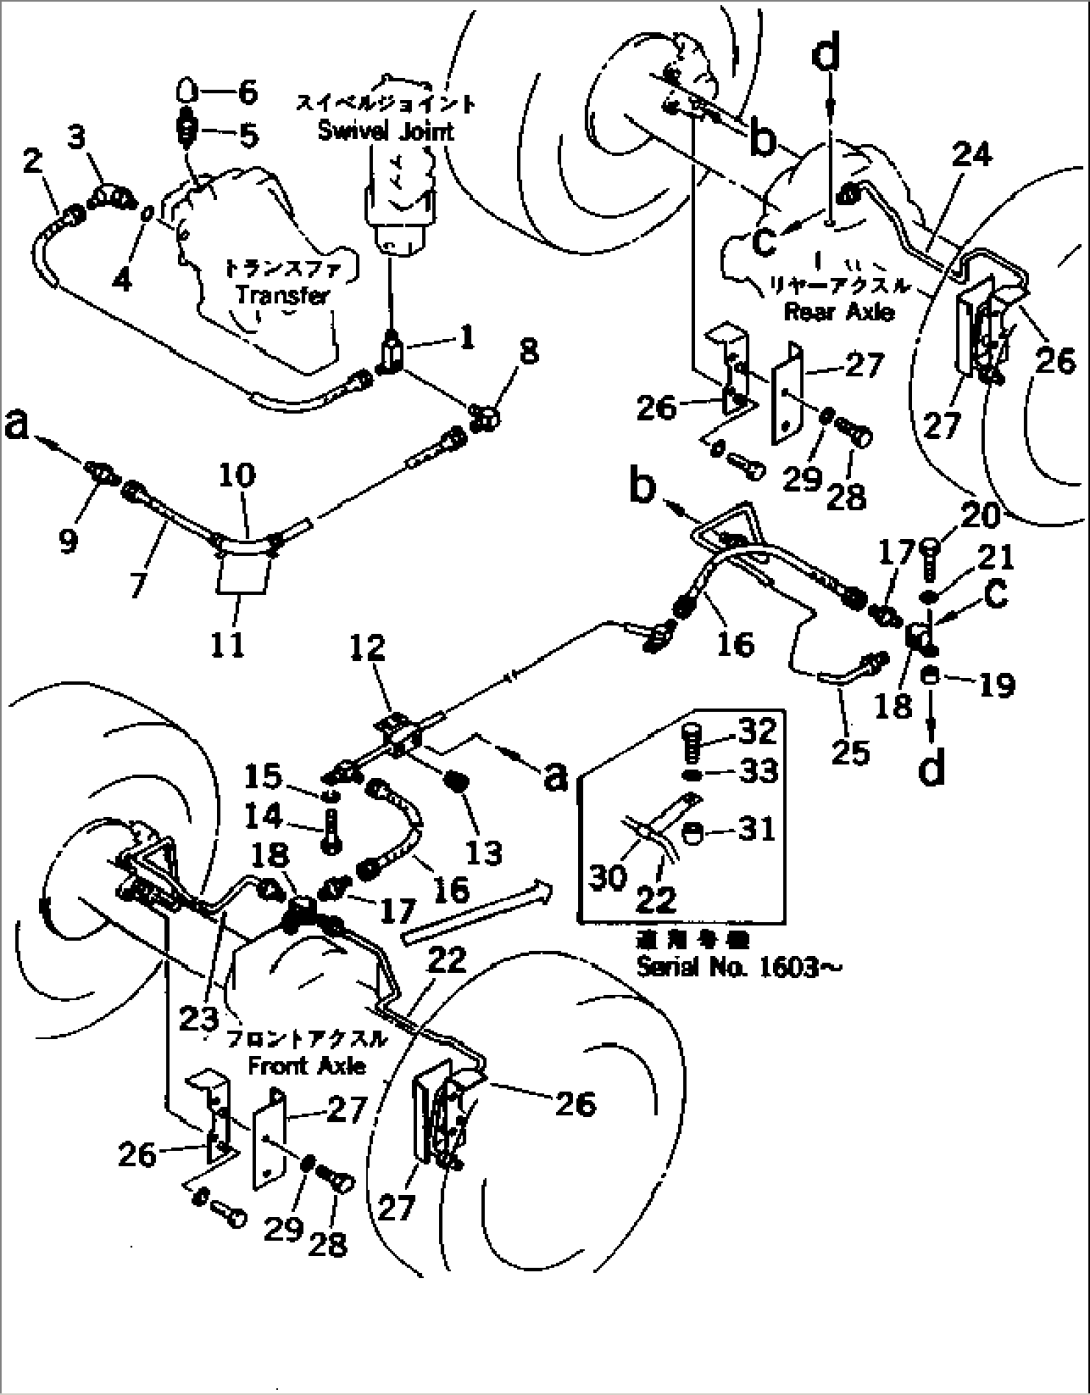 BRAKE PIPING (2/2) (WITH CANOPY OR CAB)